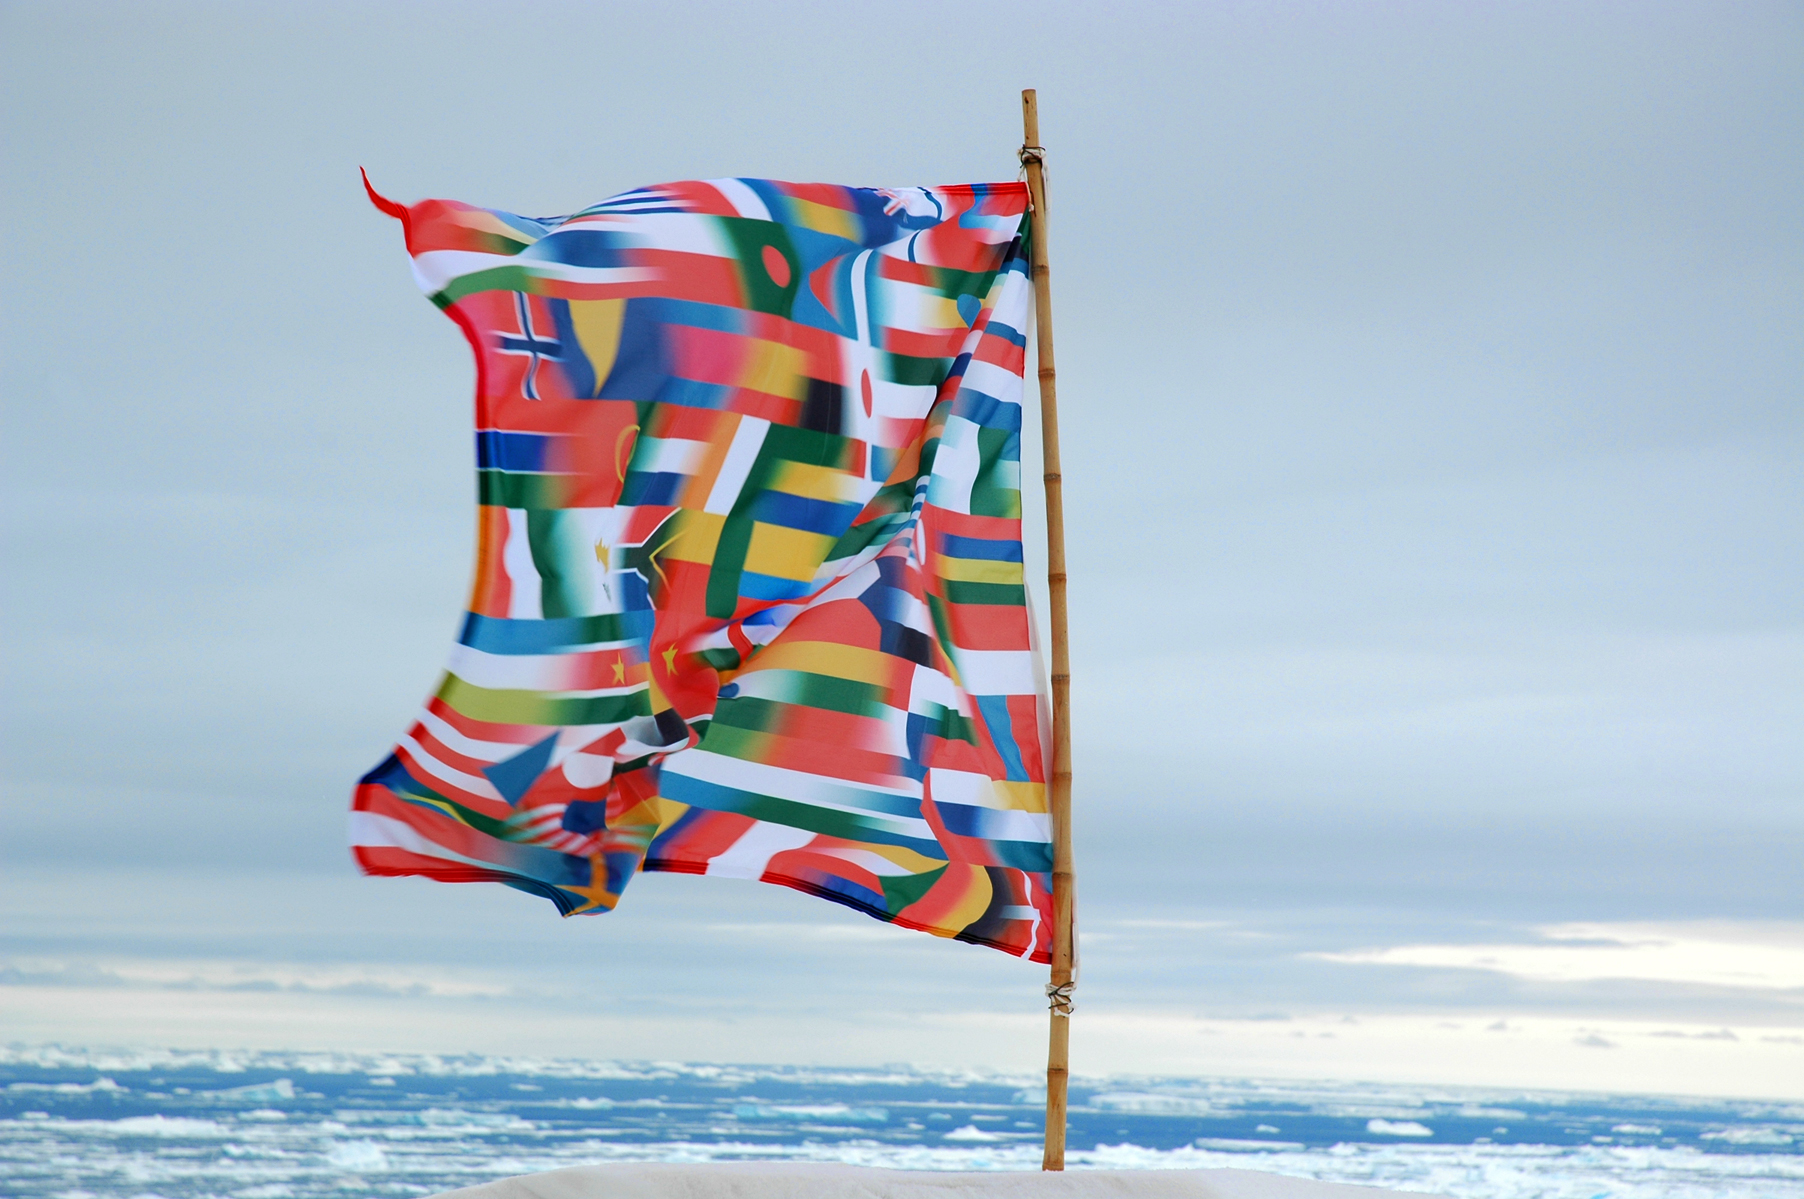 Antarctica Flag, (2007) by Lucy + Jorge Orta. All images courtesy of the artists